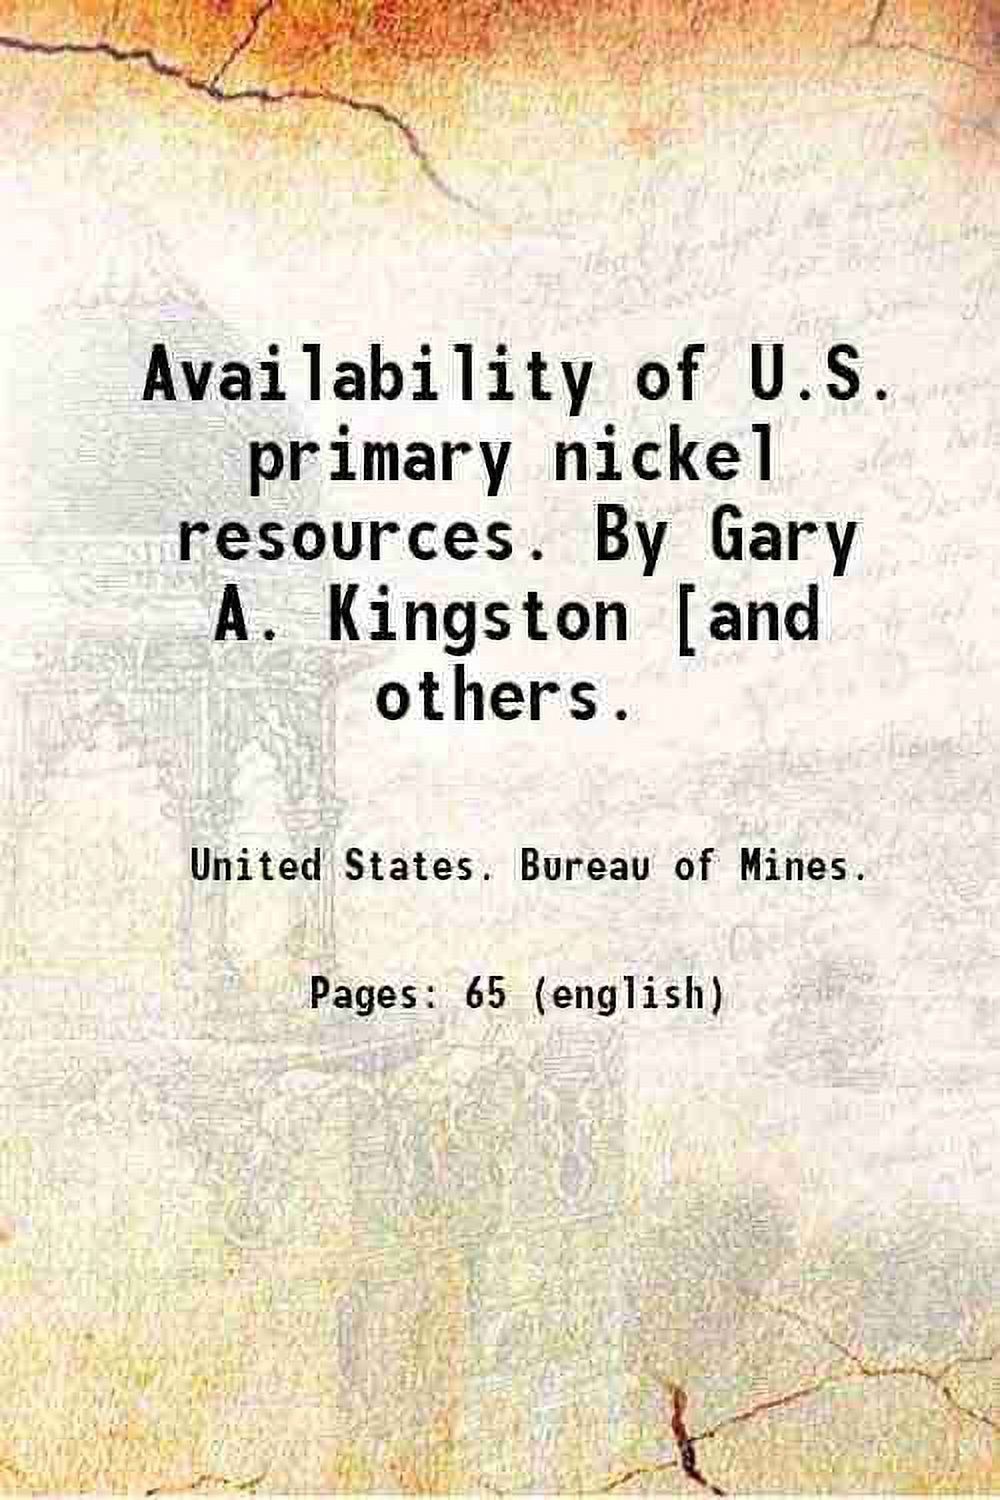 Availability of U.S. primary nickel resources. By Gary A. Kingston [and others. 1970 [Hardcover] - image 1 of 1